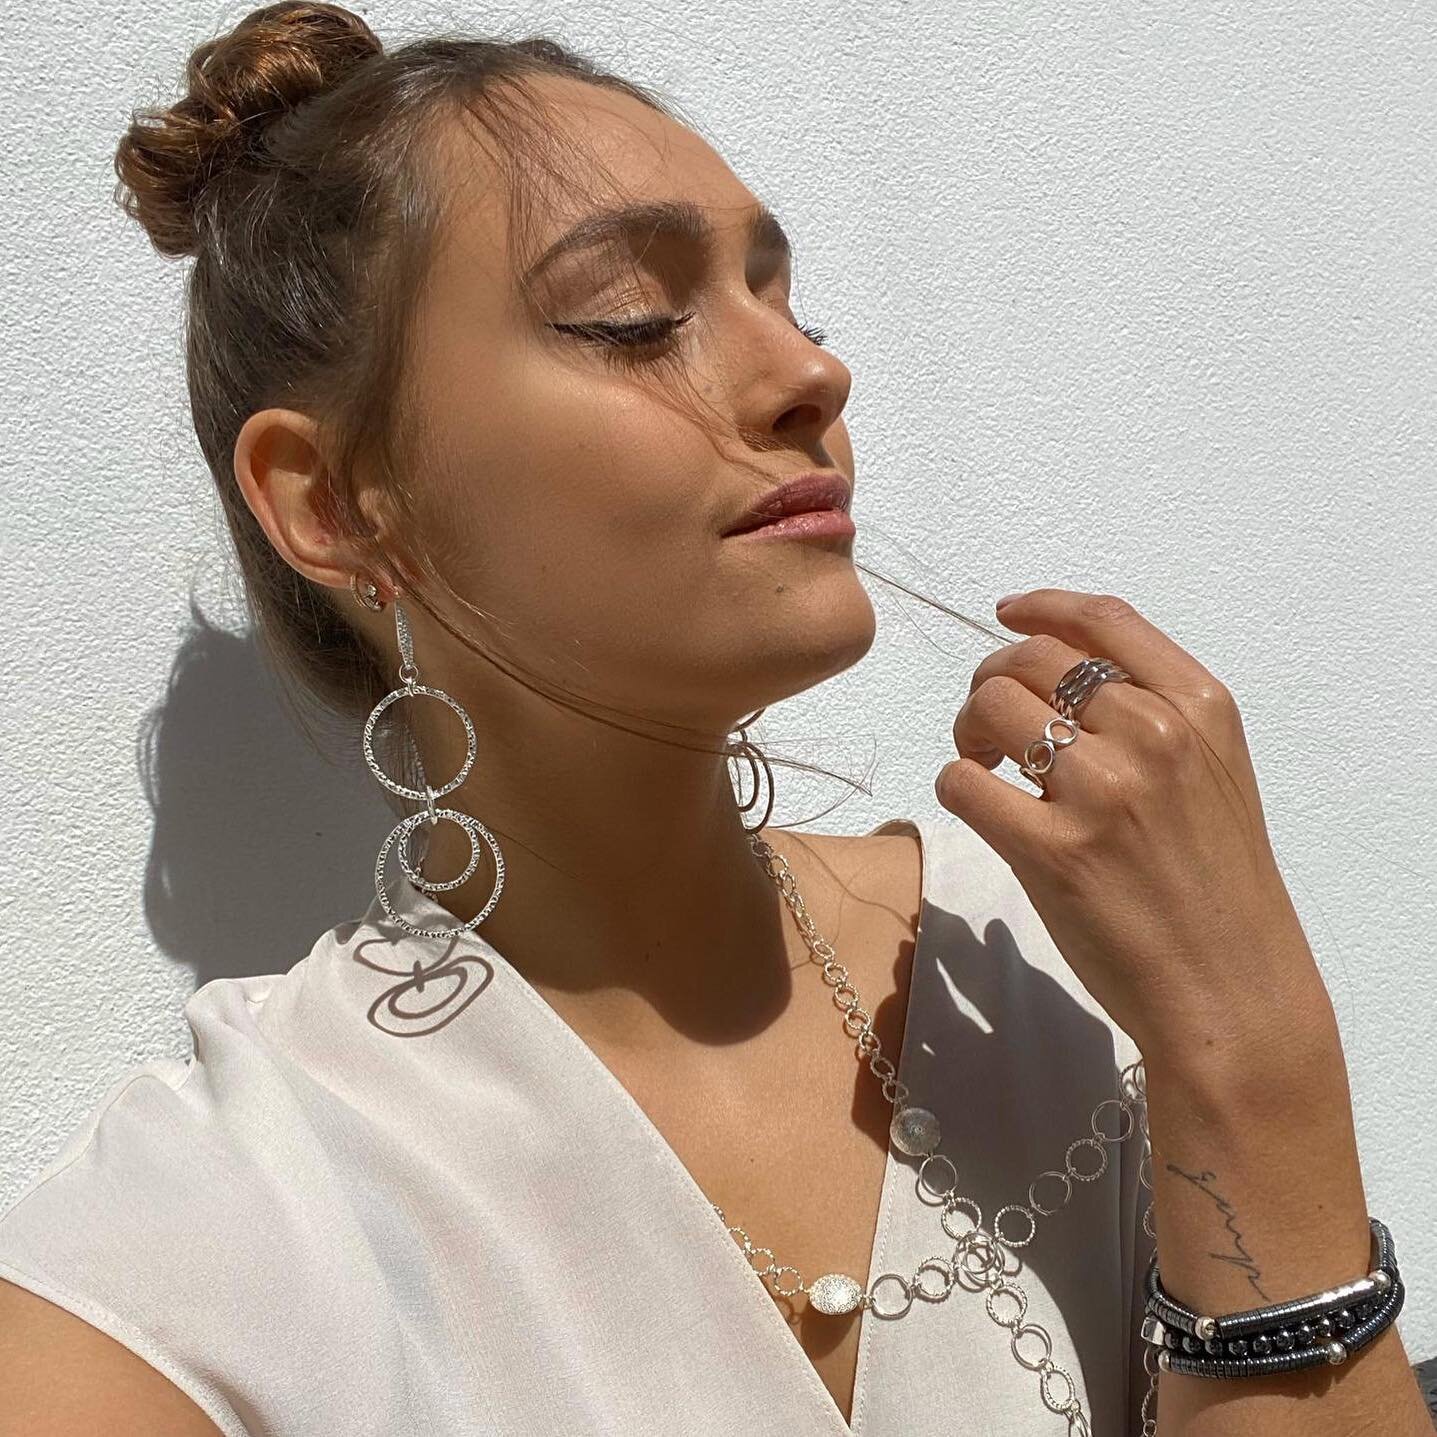 🌞Catching that summer sun, wearing the Mismatch Statement Hoops and the beautiful Long Ringlet Chain which can also be worn short by doubling it. 
🌞 Both in sterling silver. 
🛍 Head on over to the website for more!
www.kohatuandpetros.com
.
.
#sum